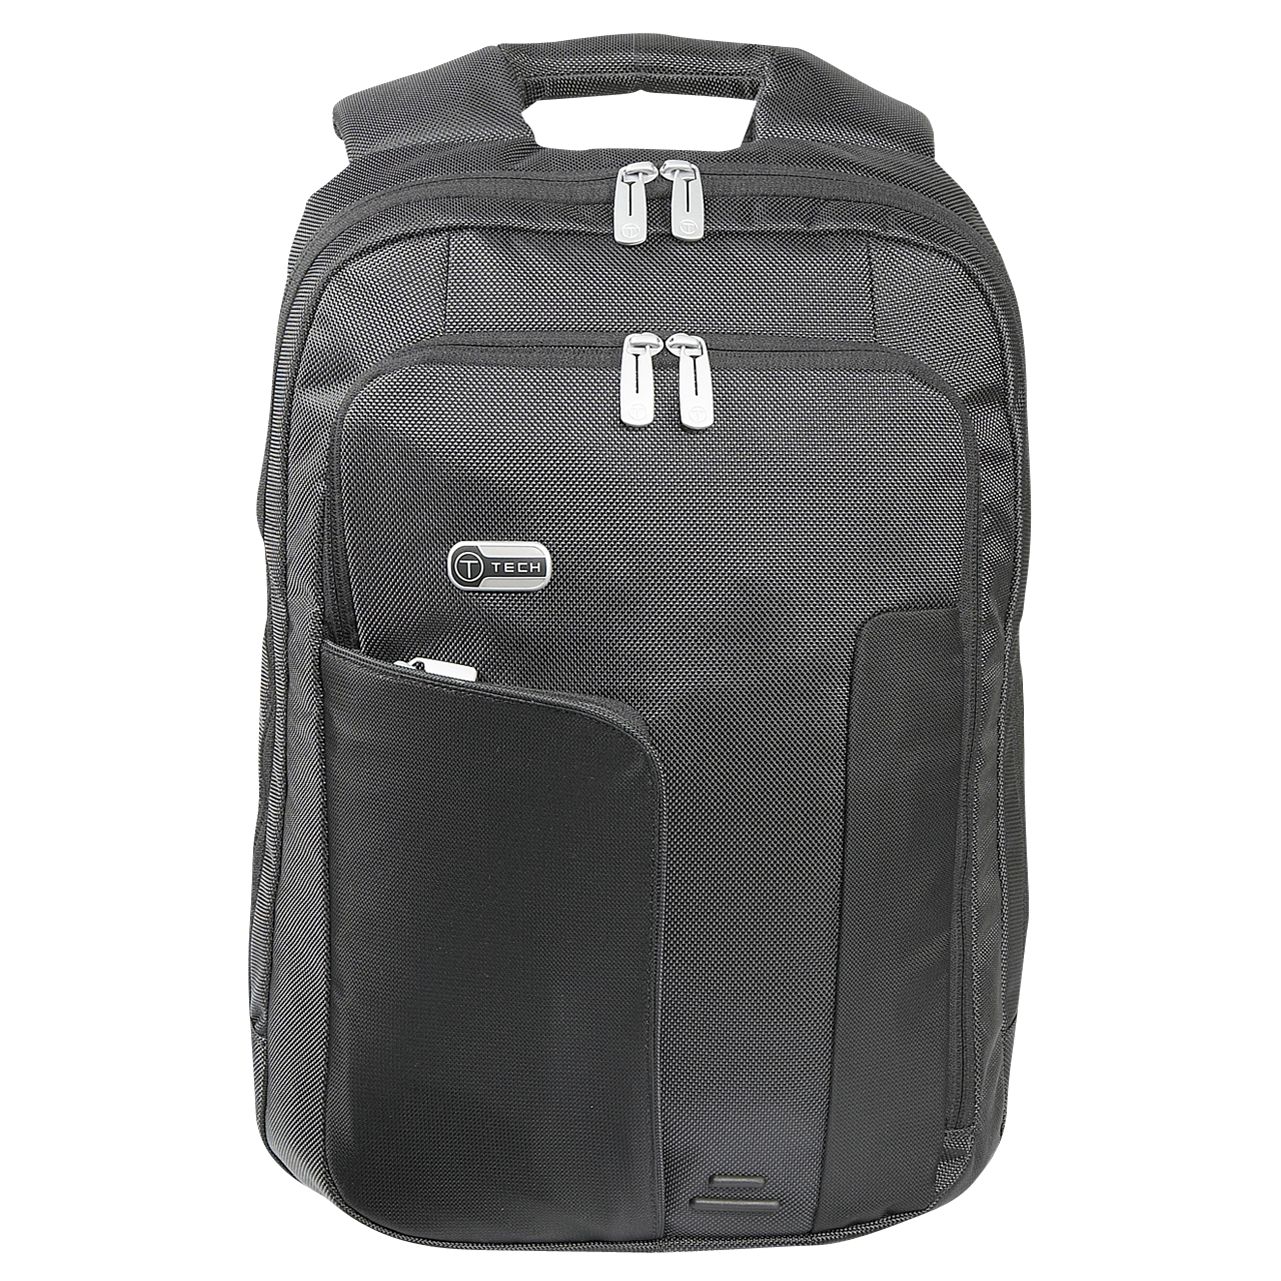 T-Tech by Tumi Empire Smith Laptop Backpack, Graphite at John Lewis